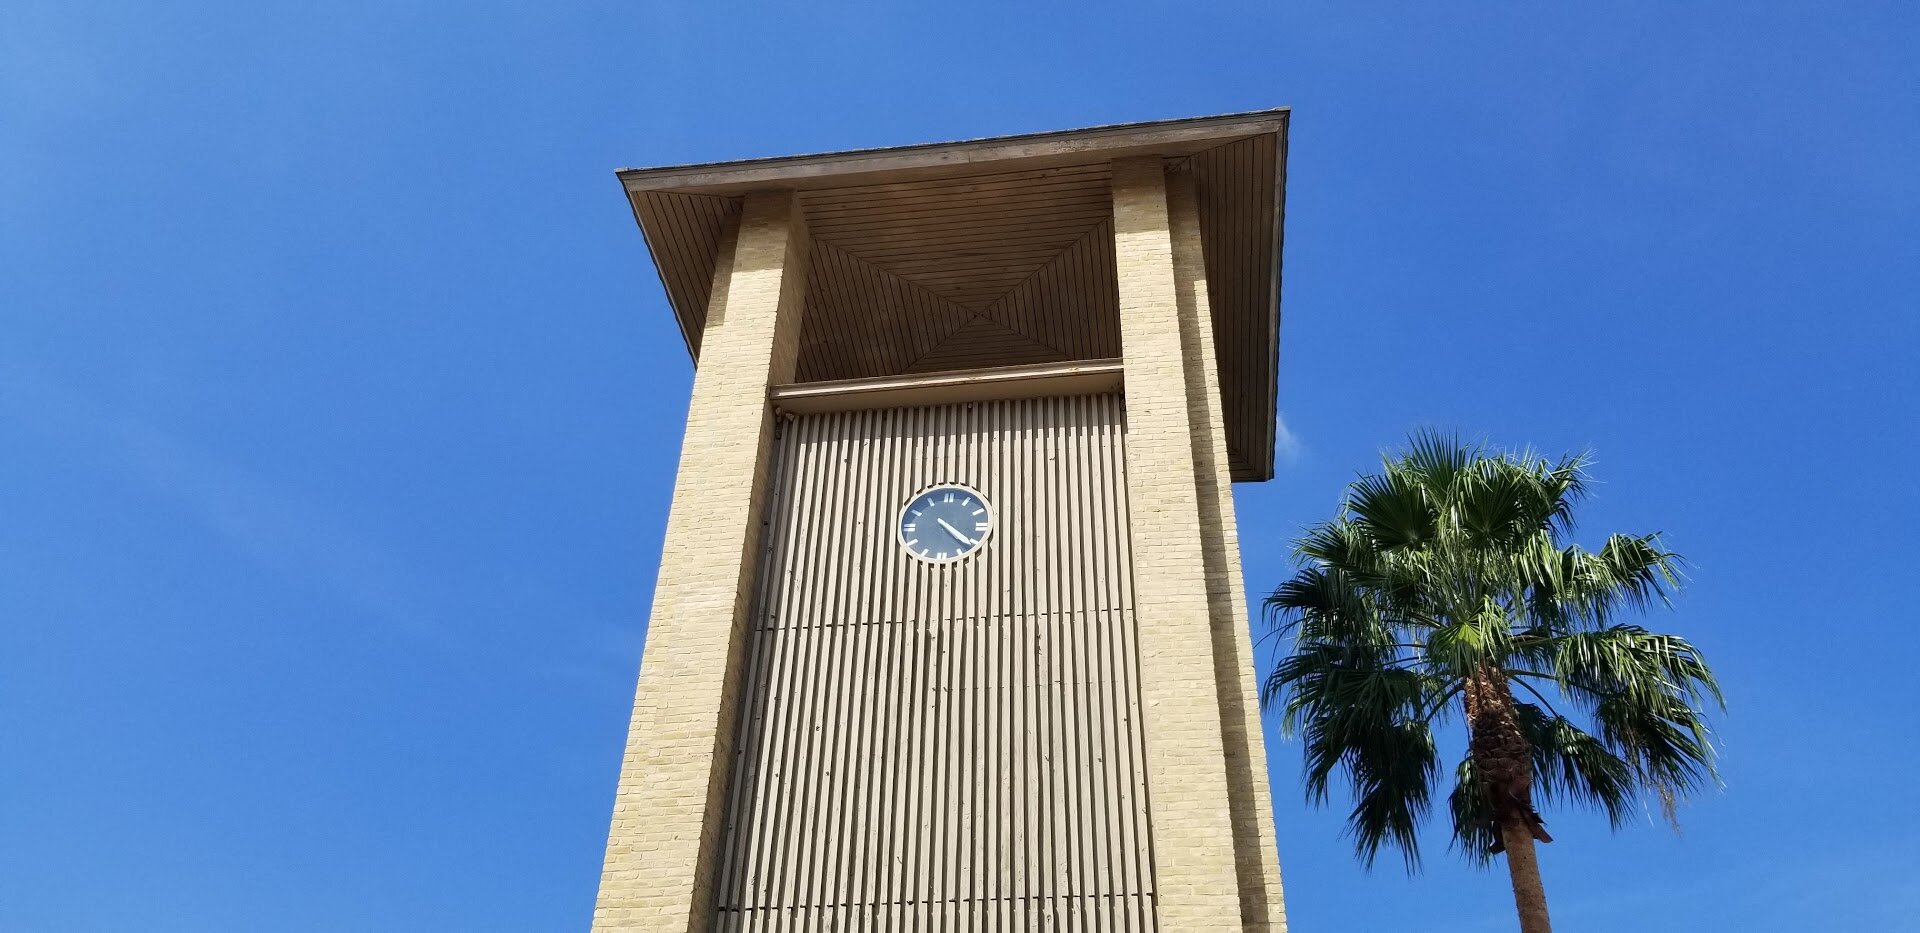 Tower at Antioch Missionary Baptist Church (1974)